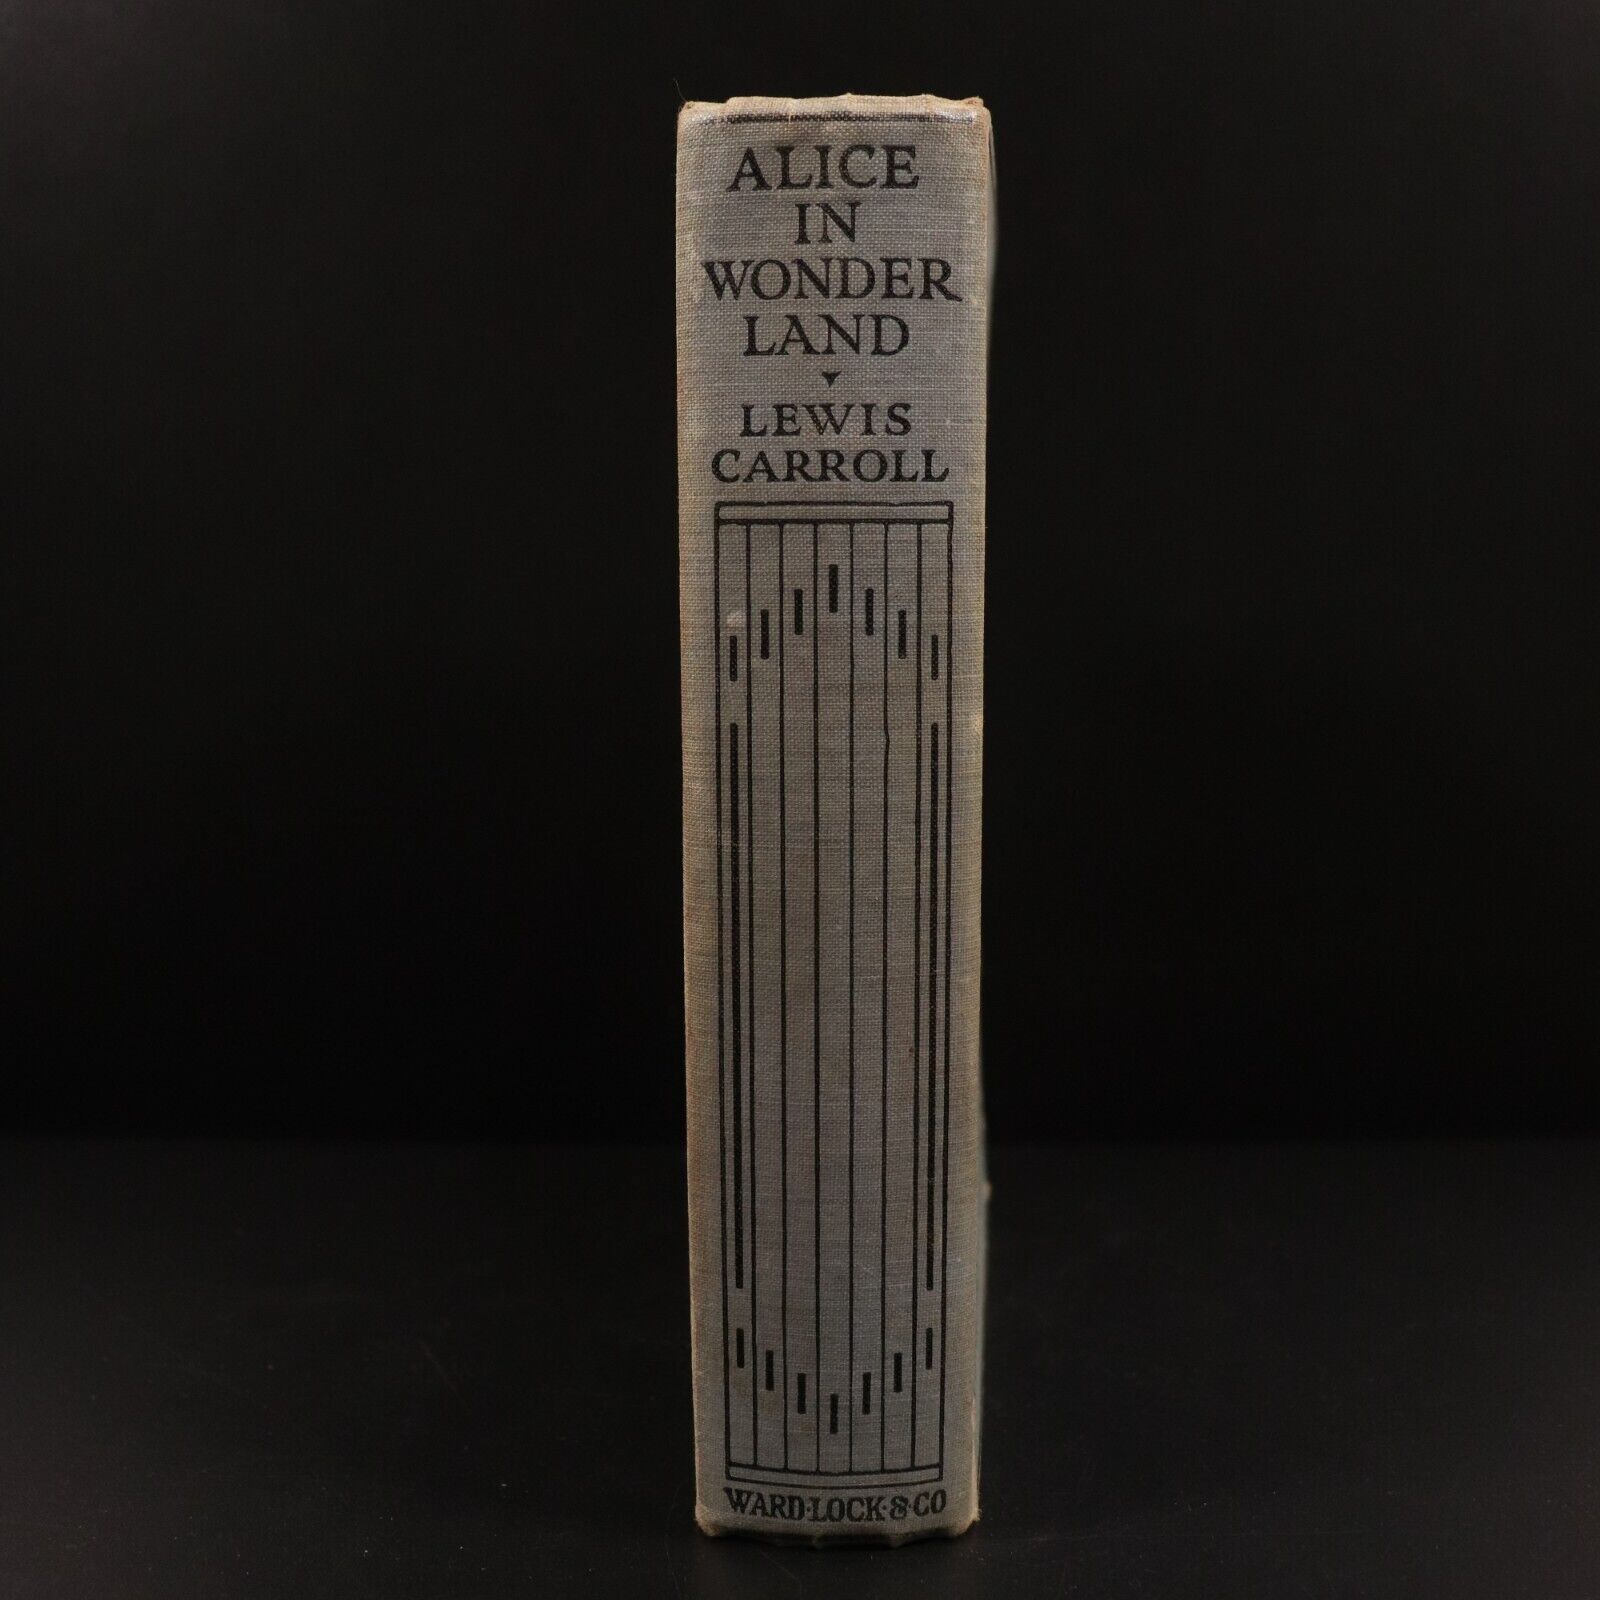 1922 Alice's Adventures In Wonderland by Carroll & Tarrant Antique Fiction Book